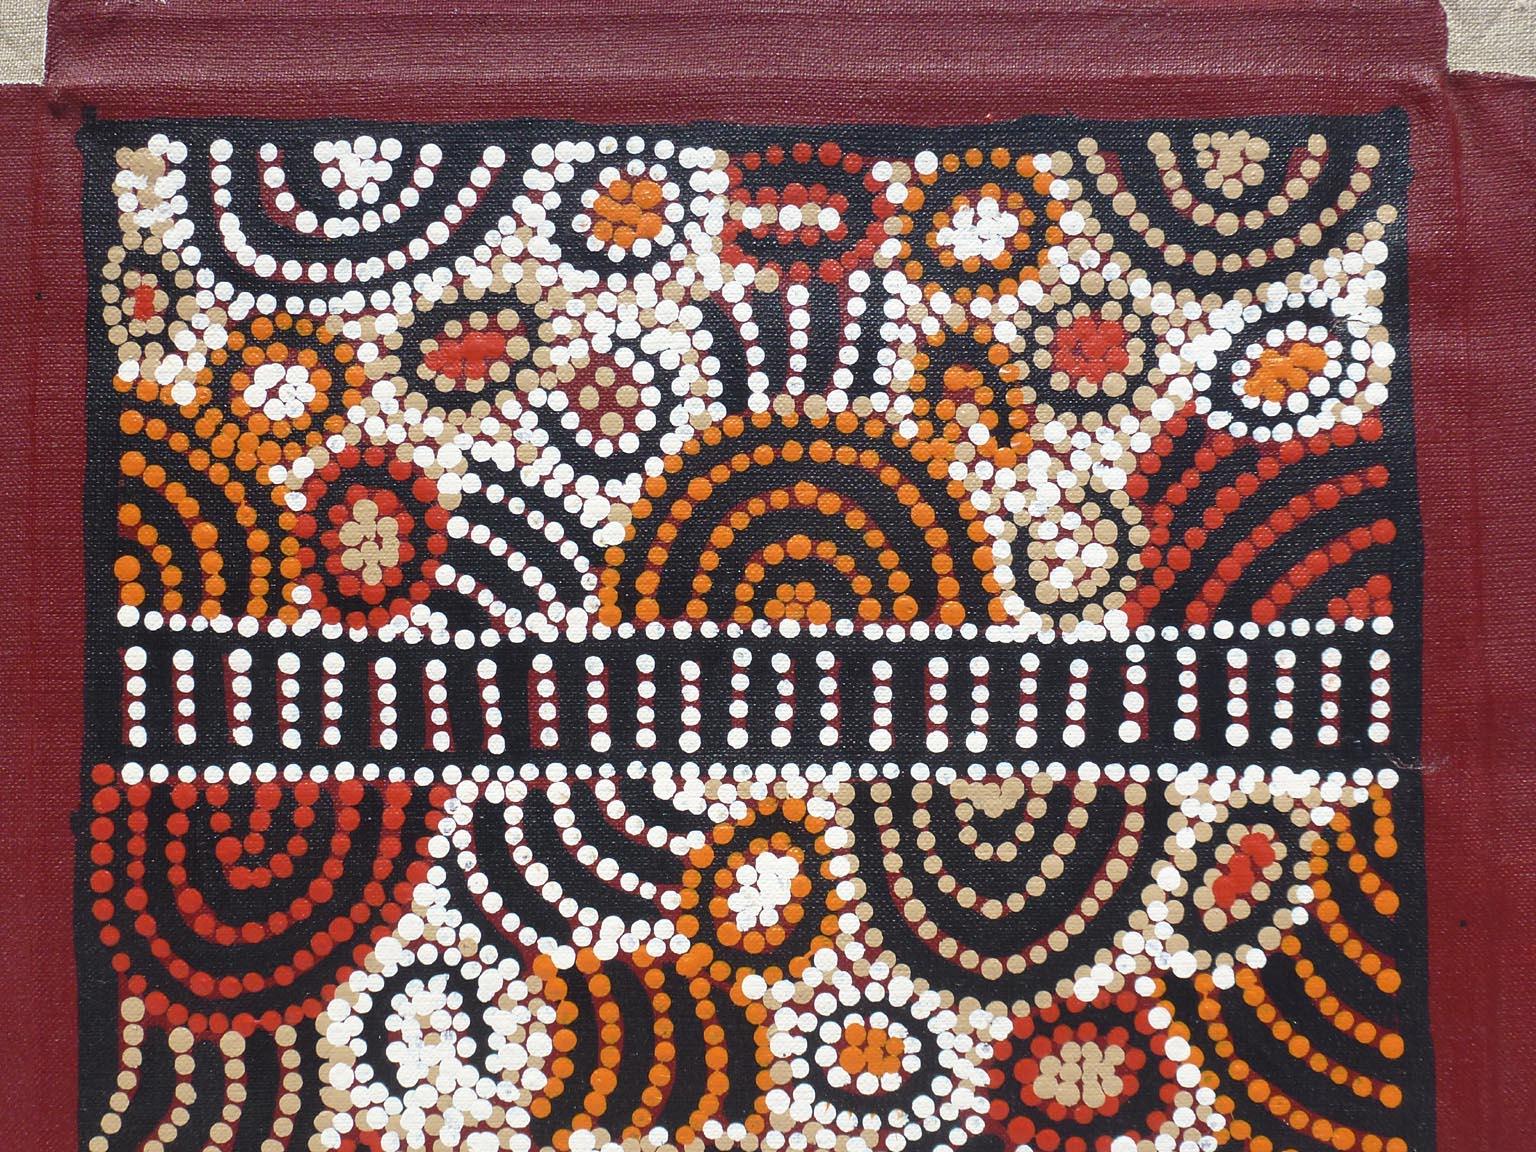 Hand-Painted An Australian Aboriginal Drawing by Kim Butler Napurrula. For Sale